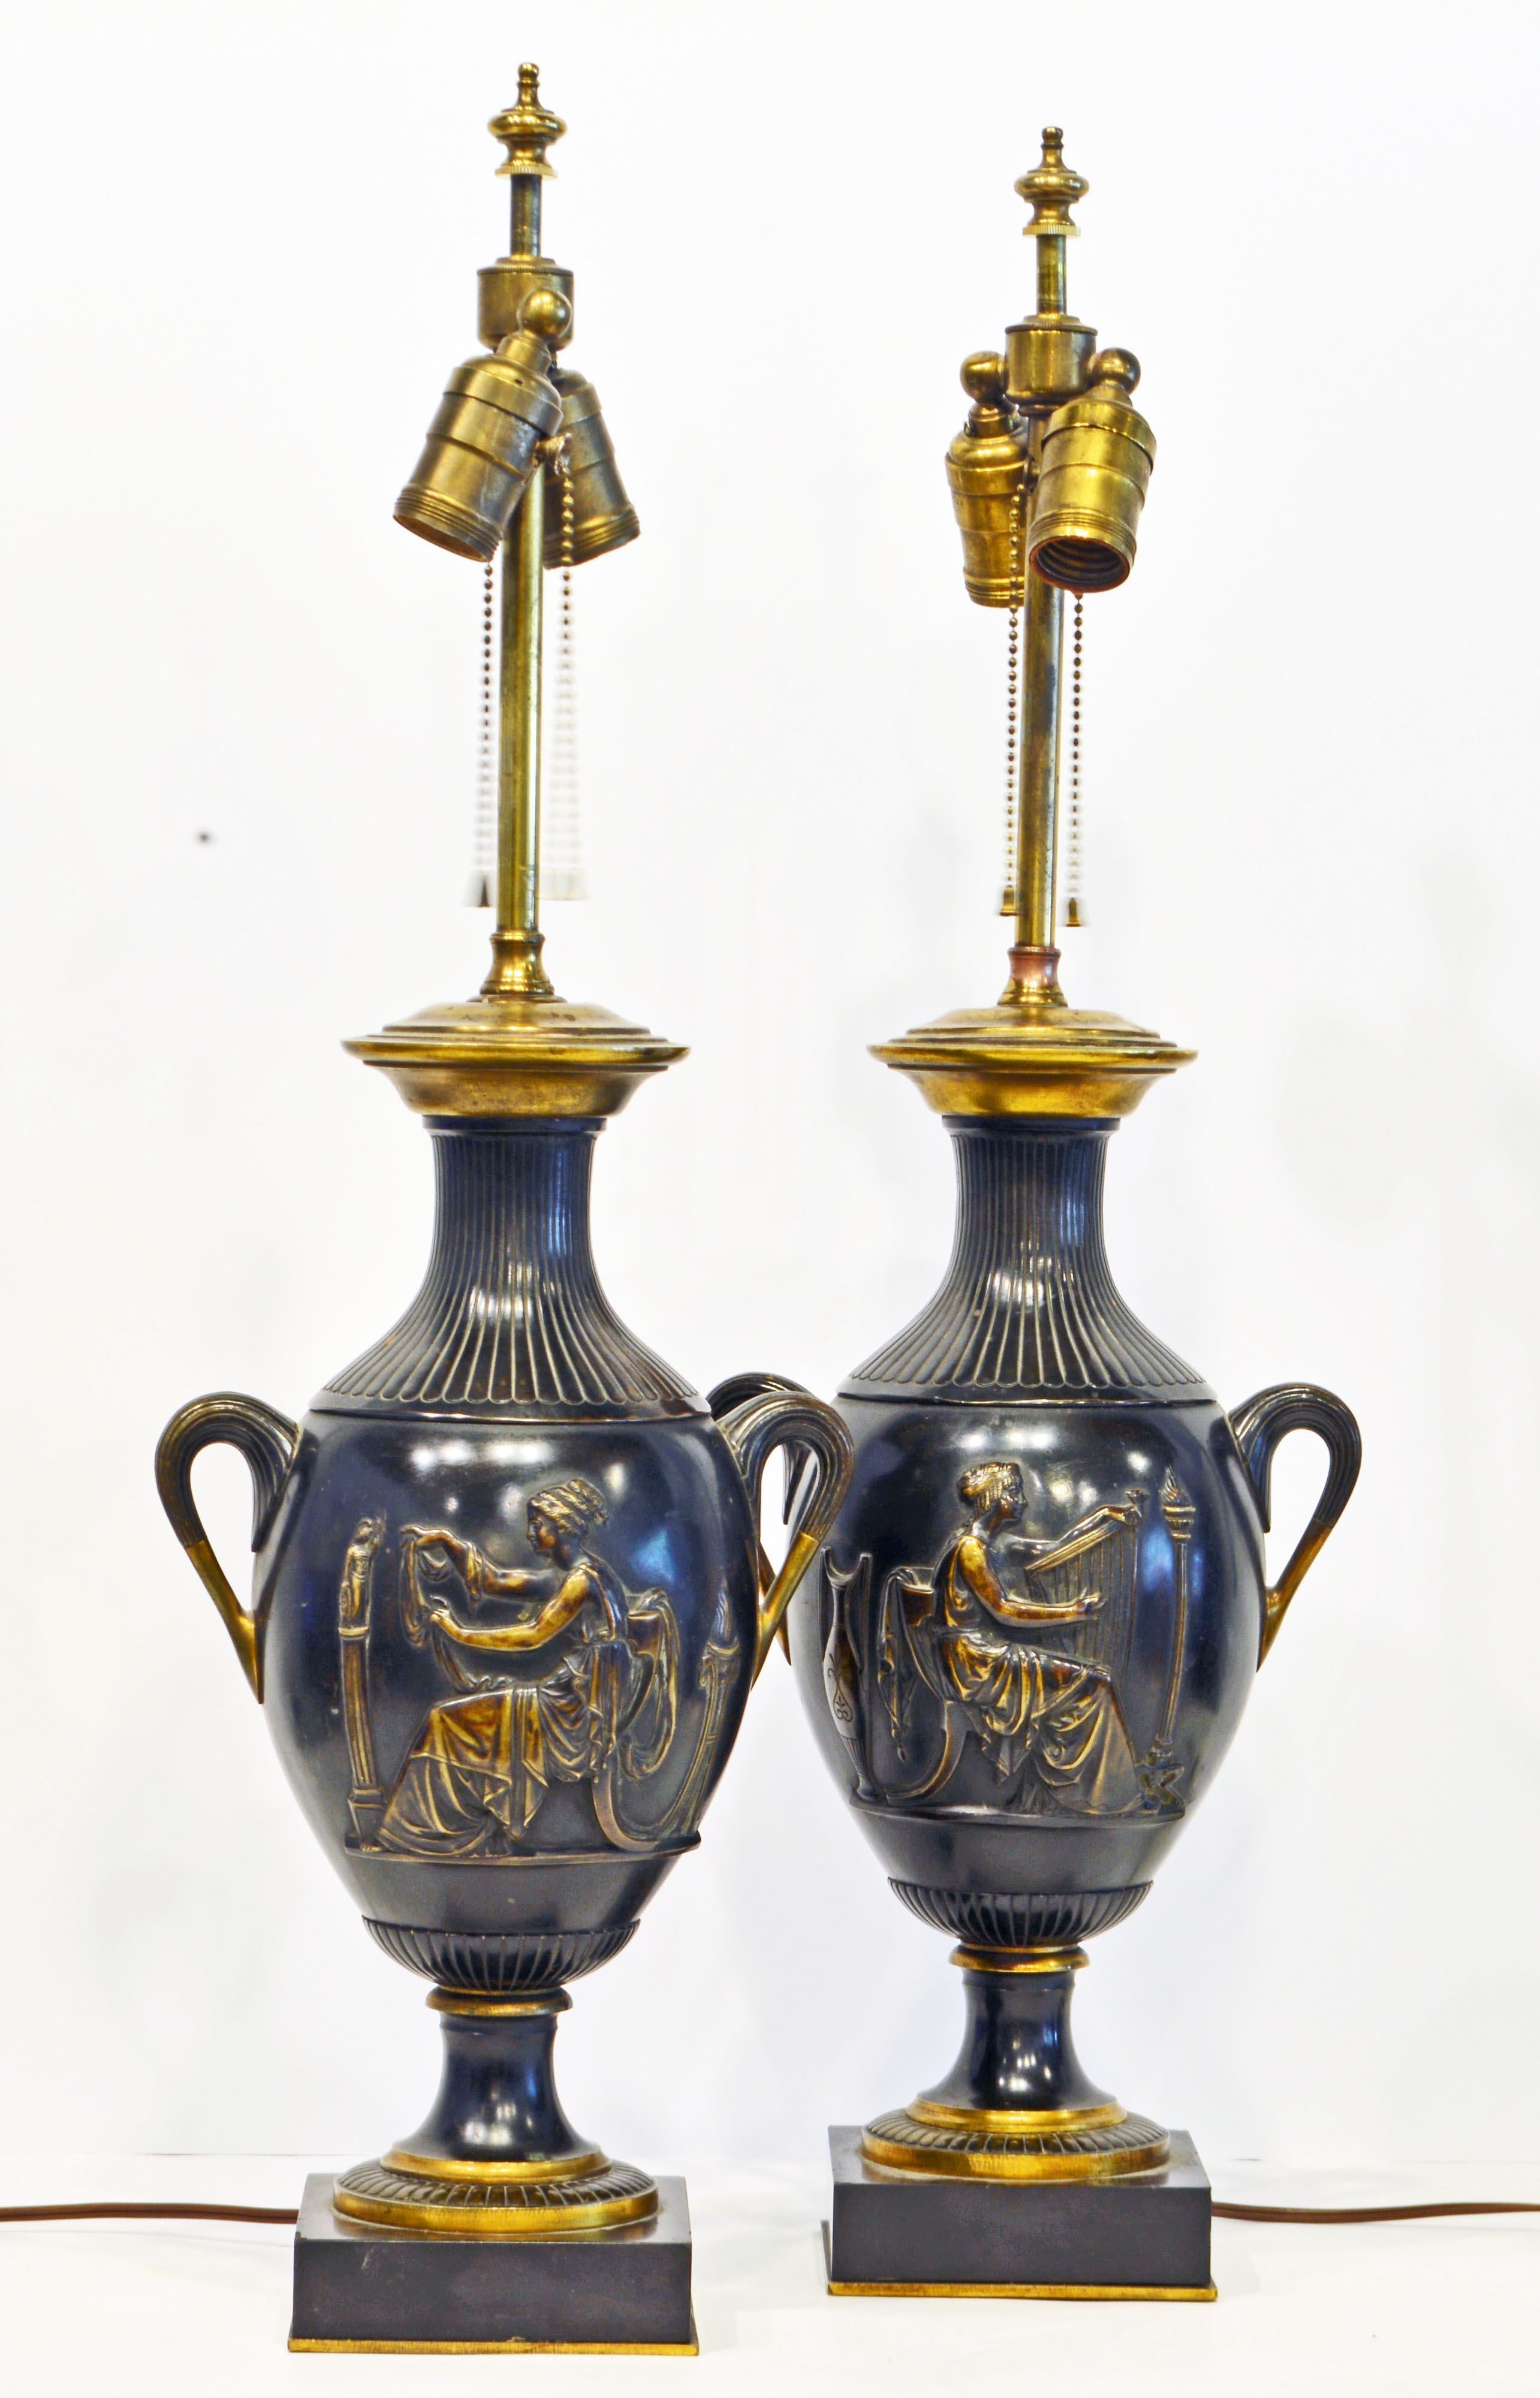 These superior French neoclassical bronze table lamps likely date to the late 19th century and are designed in the Greco-Roman tradition featuring in haut-relief figures of women playing music and working. The combination of dark patinated bronze